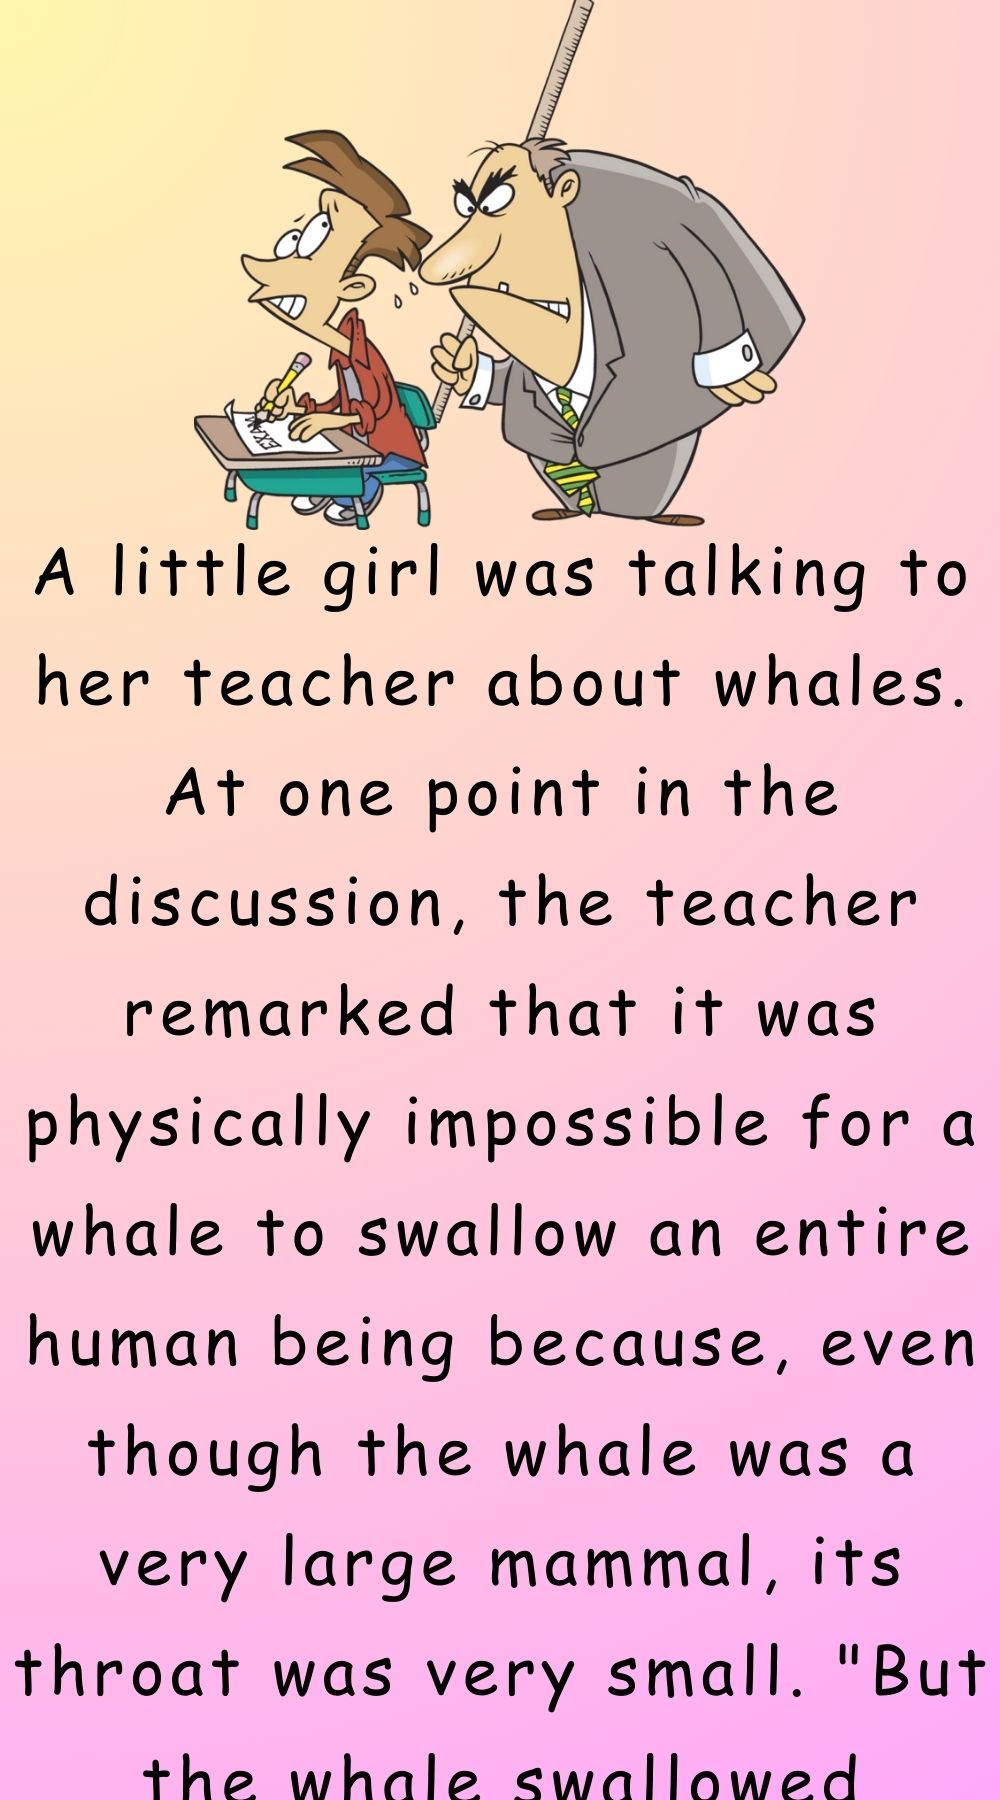 A little girl was talking to her teacher about whales